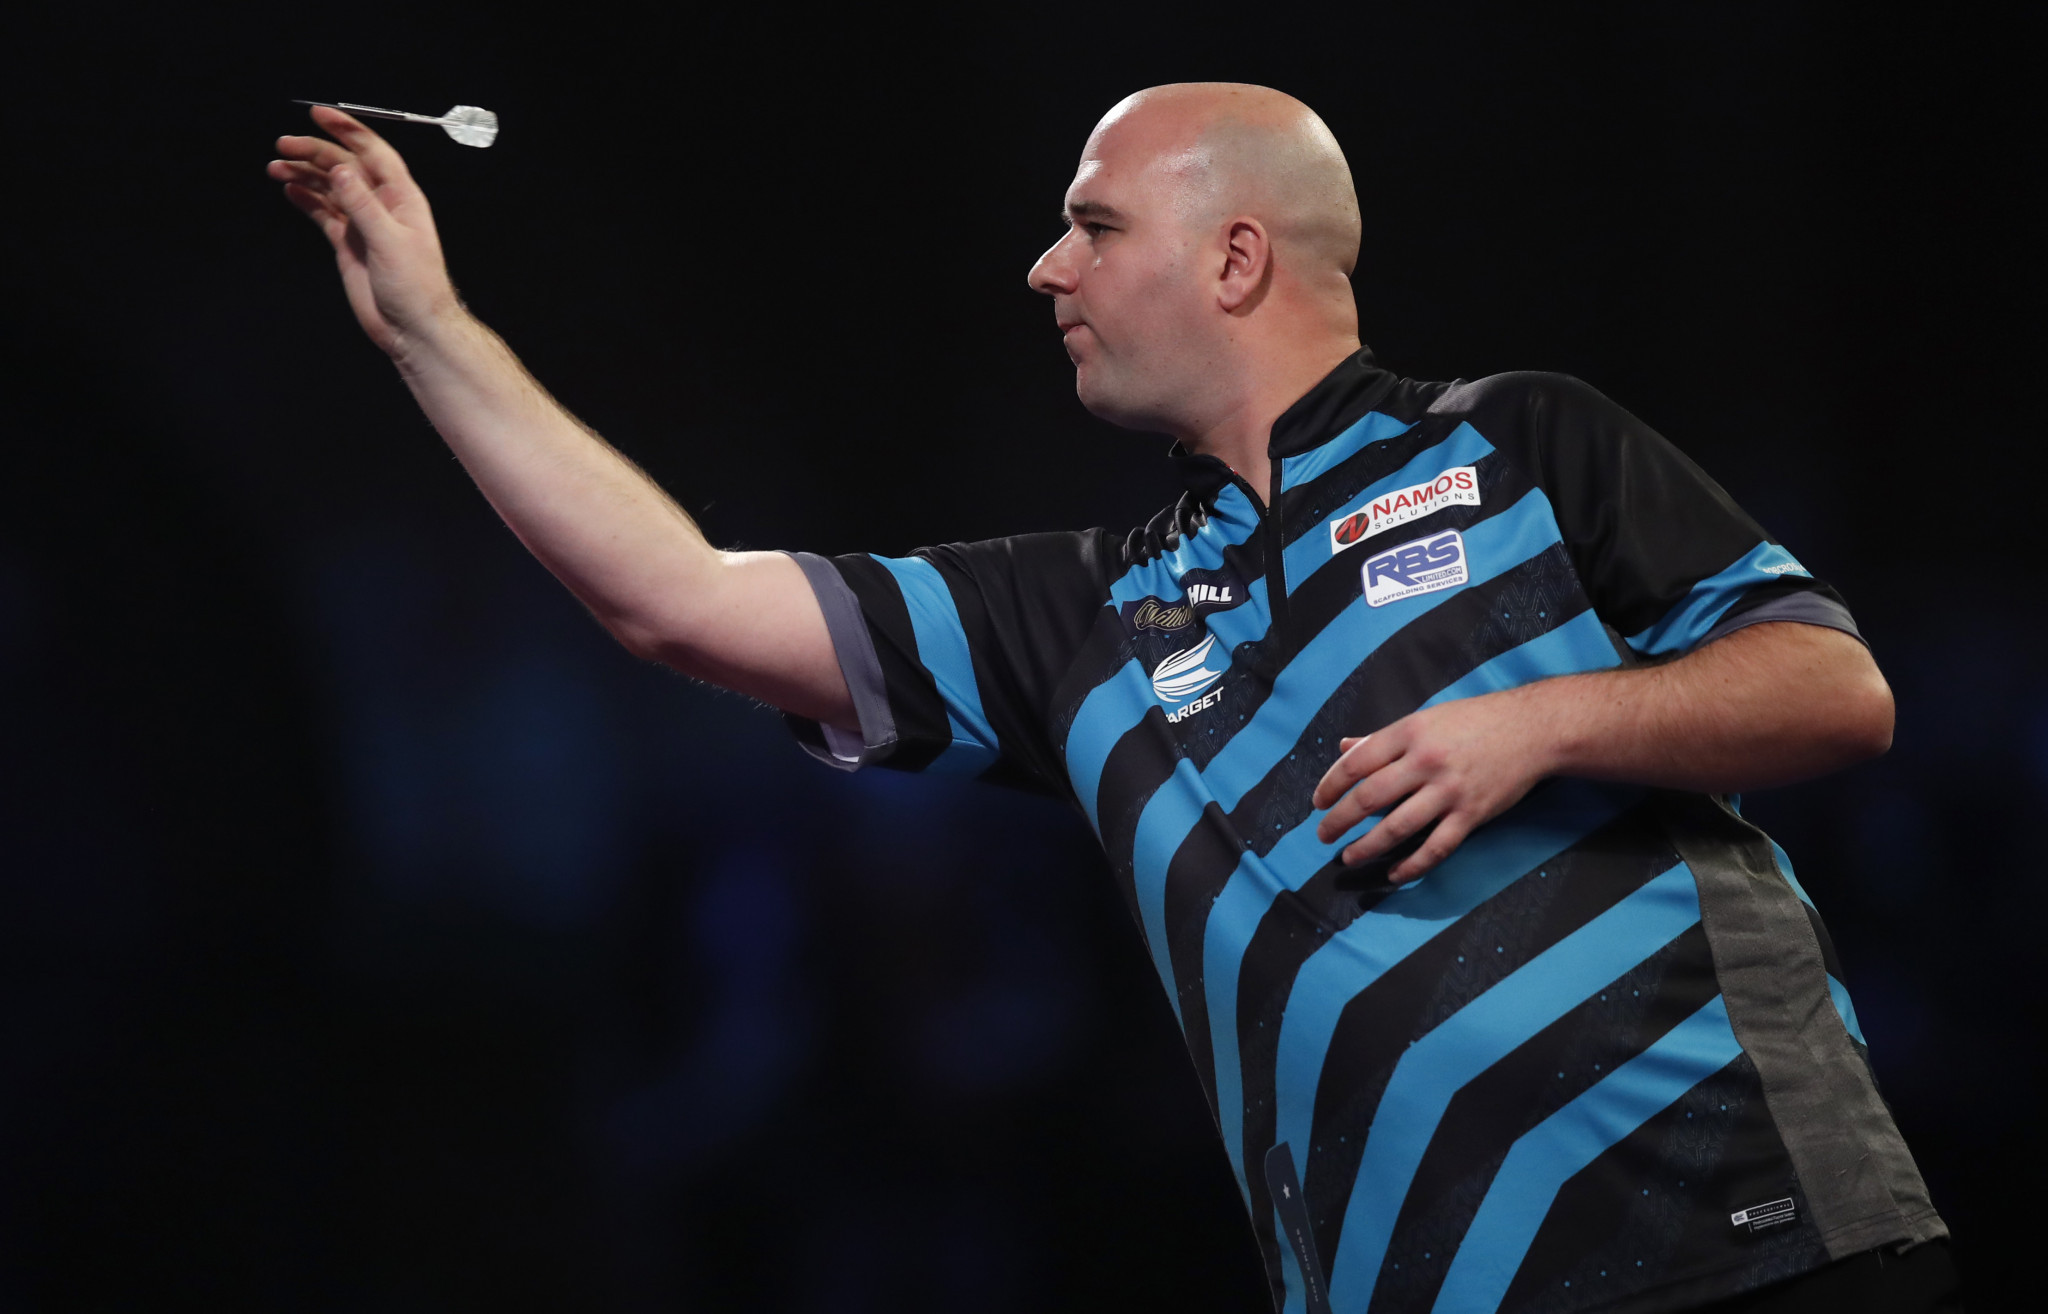 England's Rob Cross beat The Netherlands Raymond van Barneveld 3-1 in the second round of the World Darts Championship in London ©Getty Images